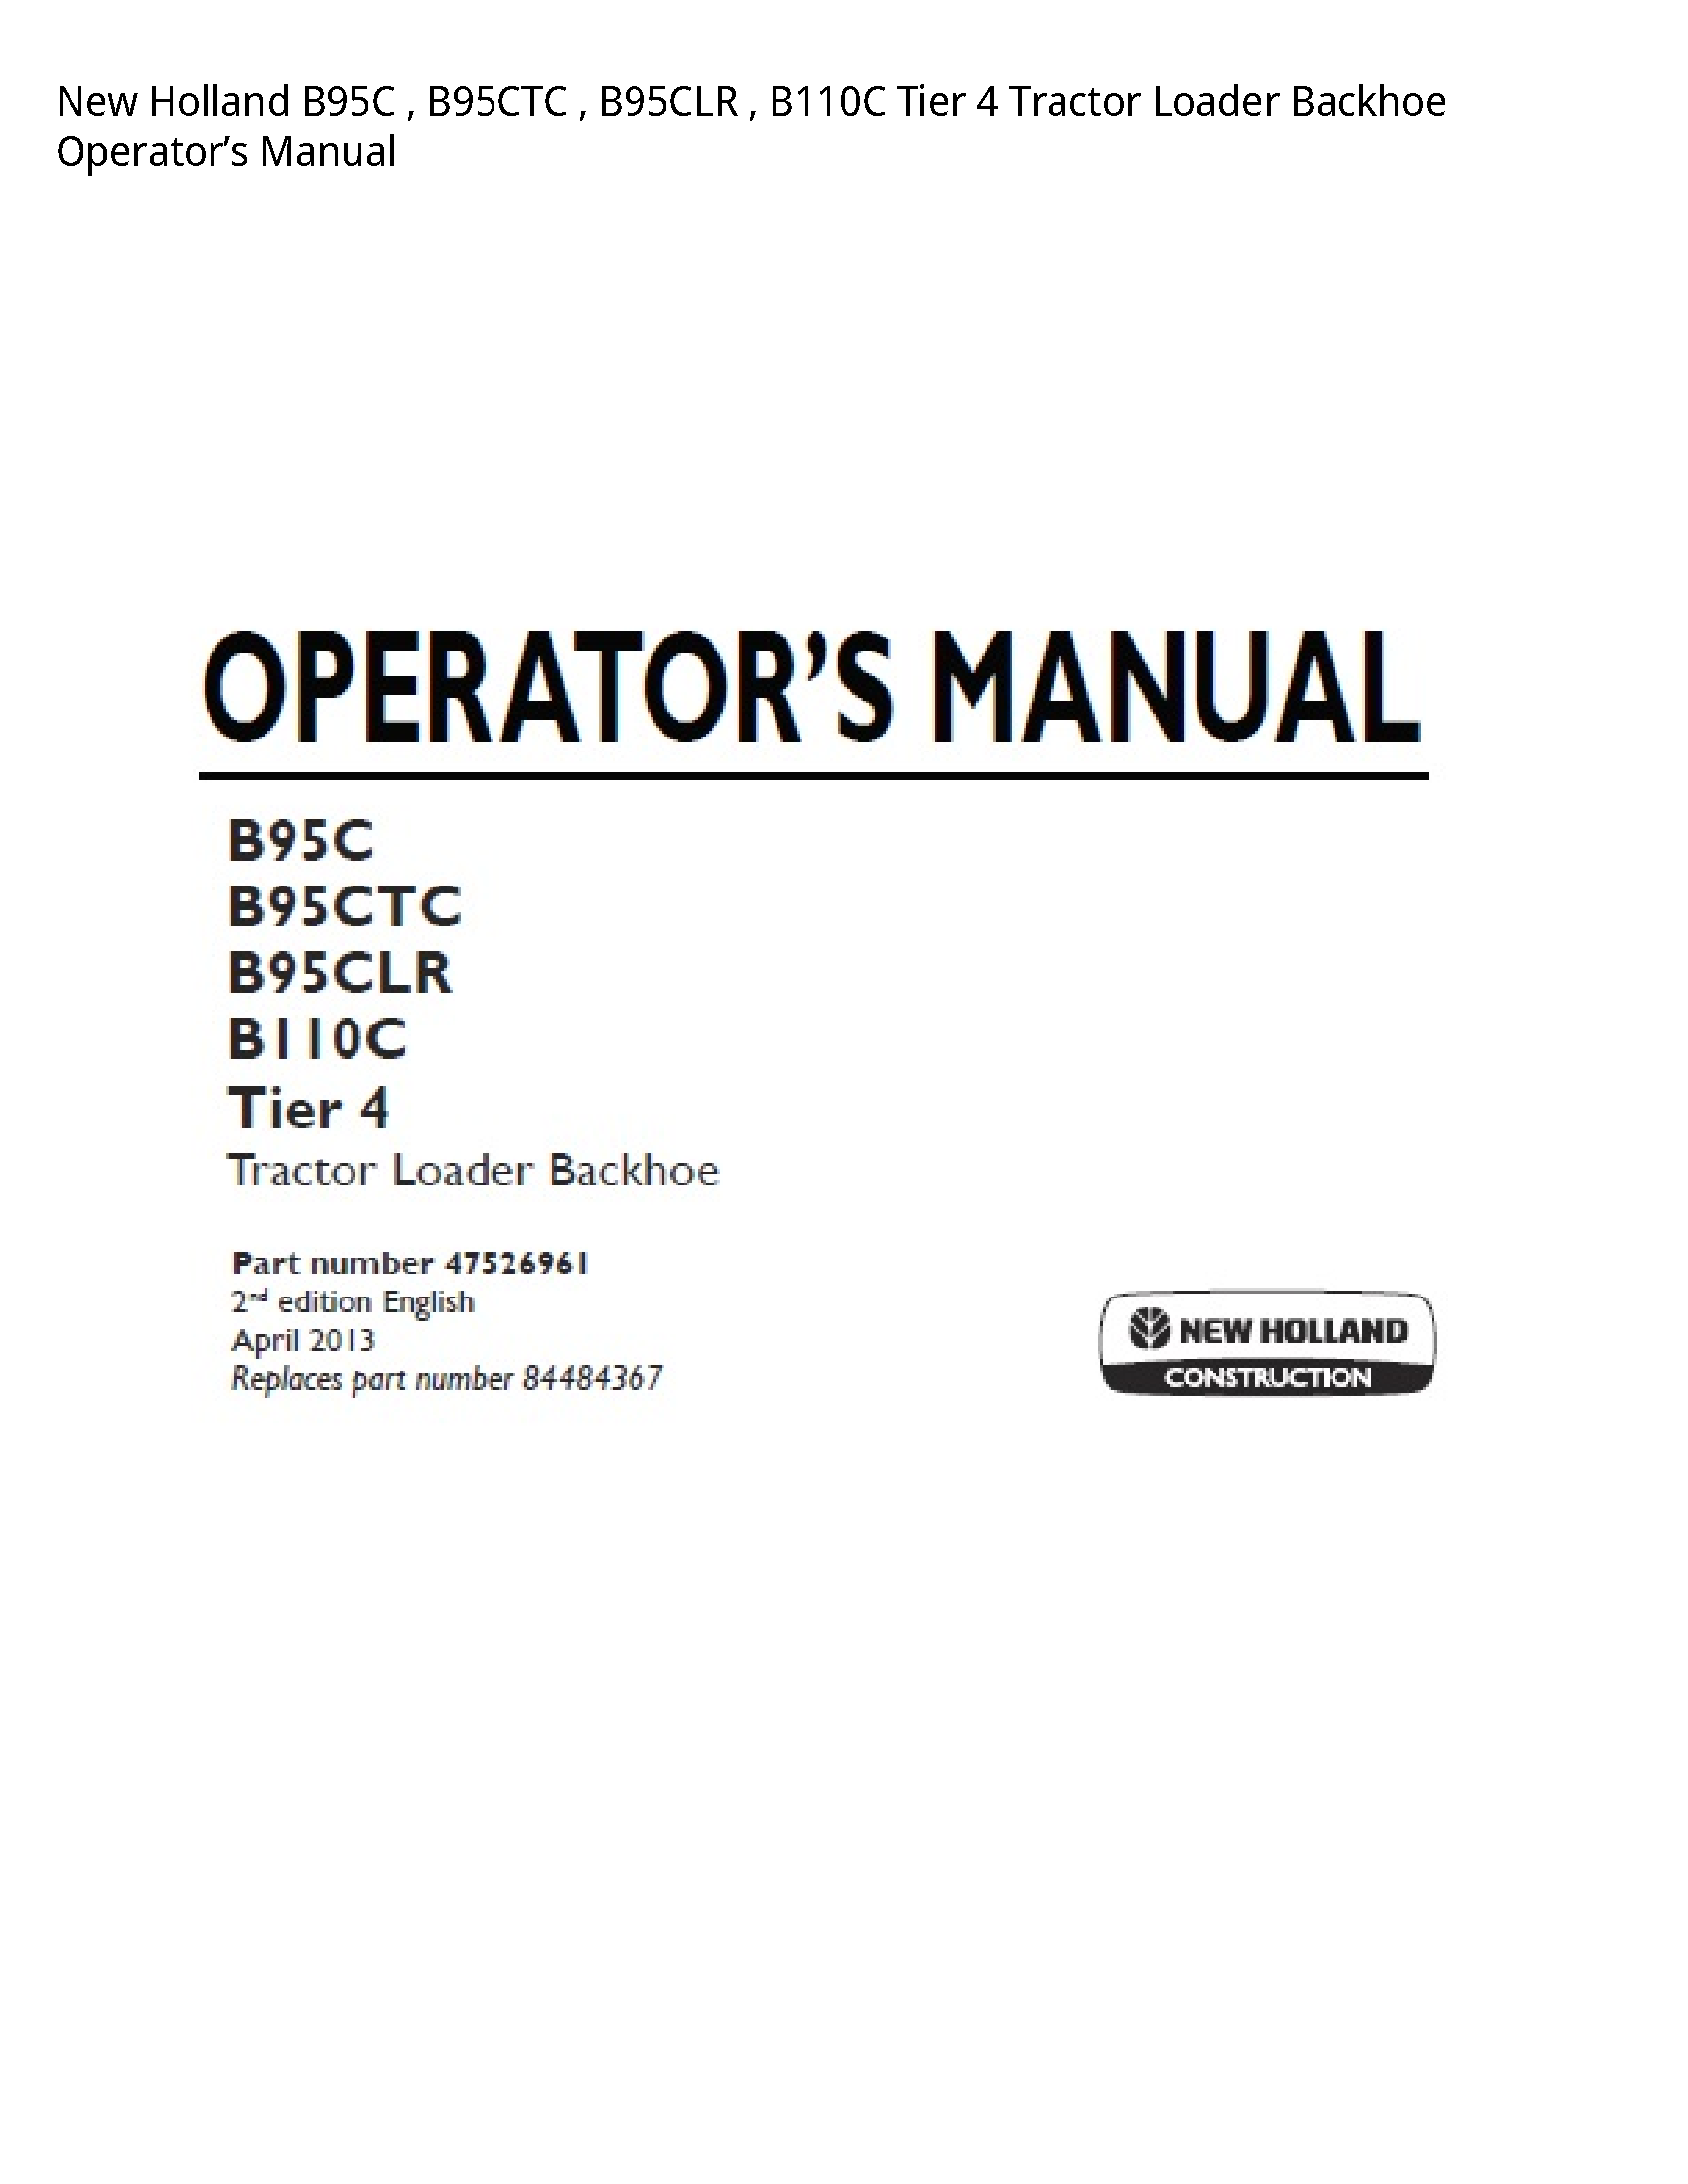 New Holland B95C Tier Tractor Loader Backhoe Operator’s manual